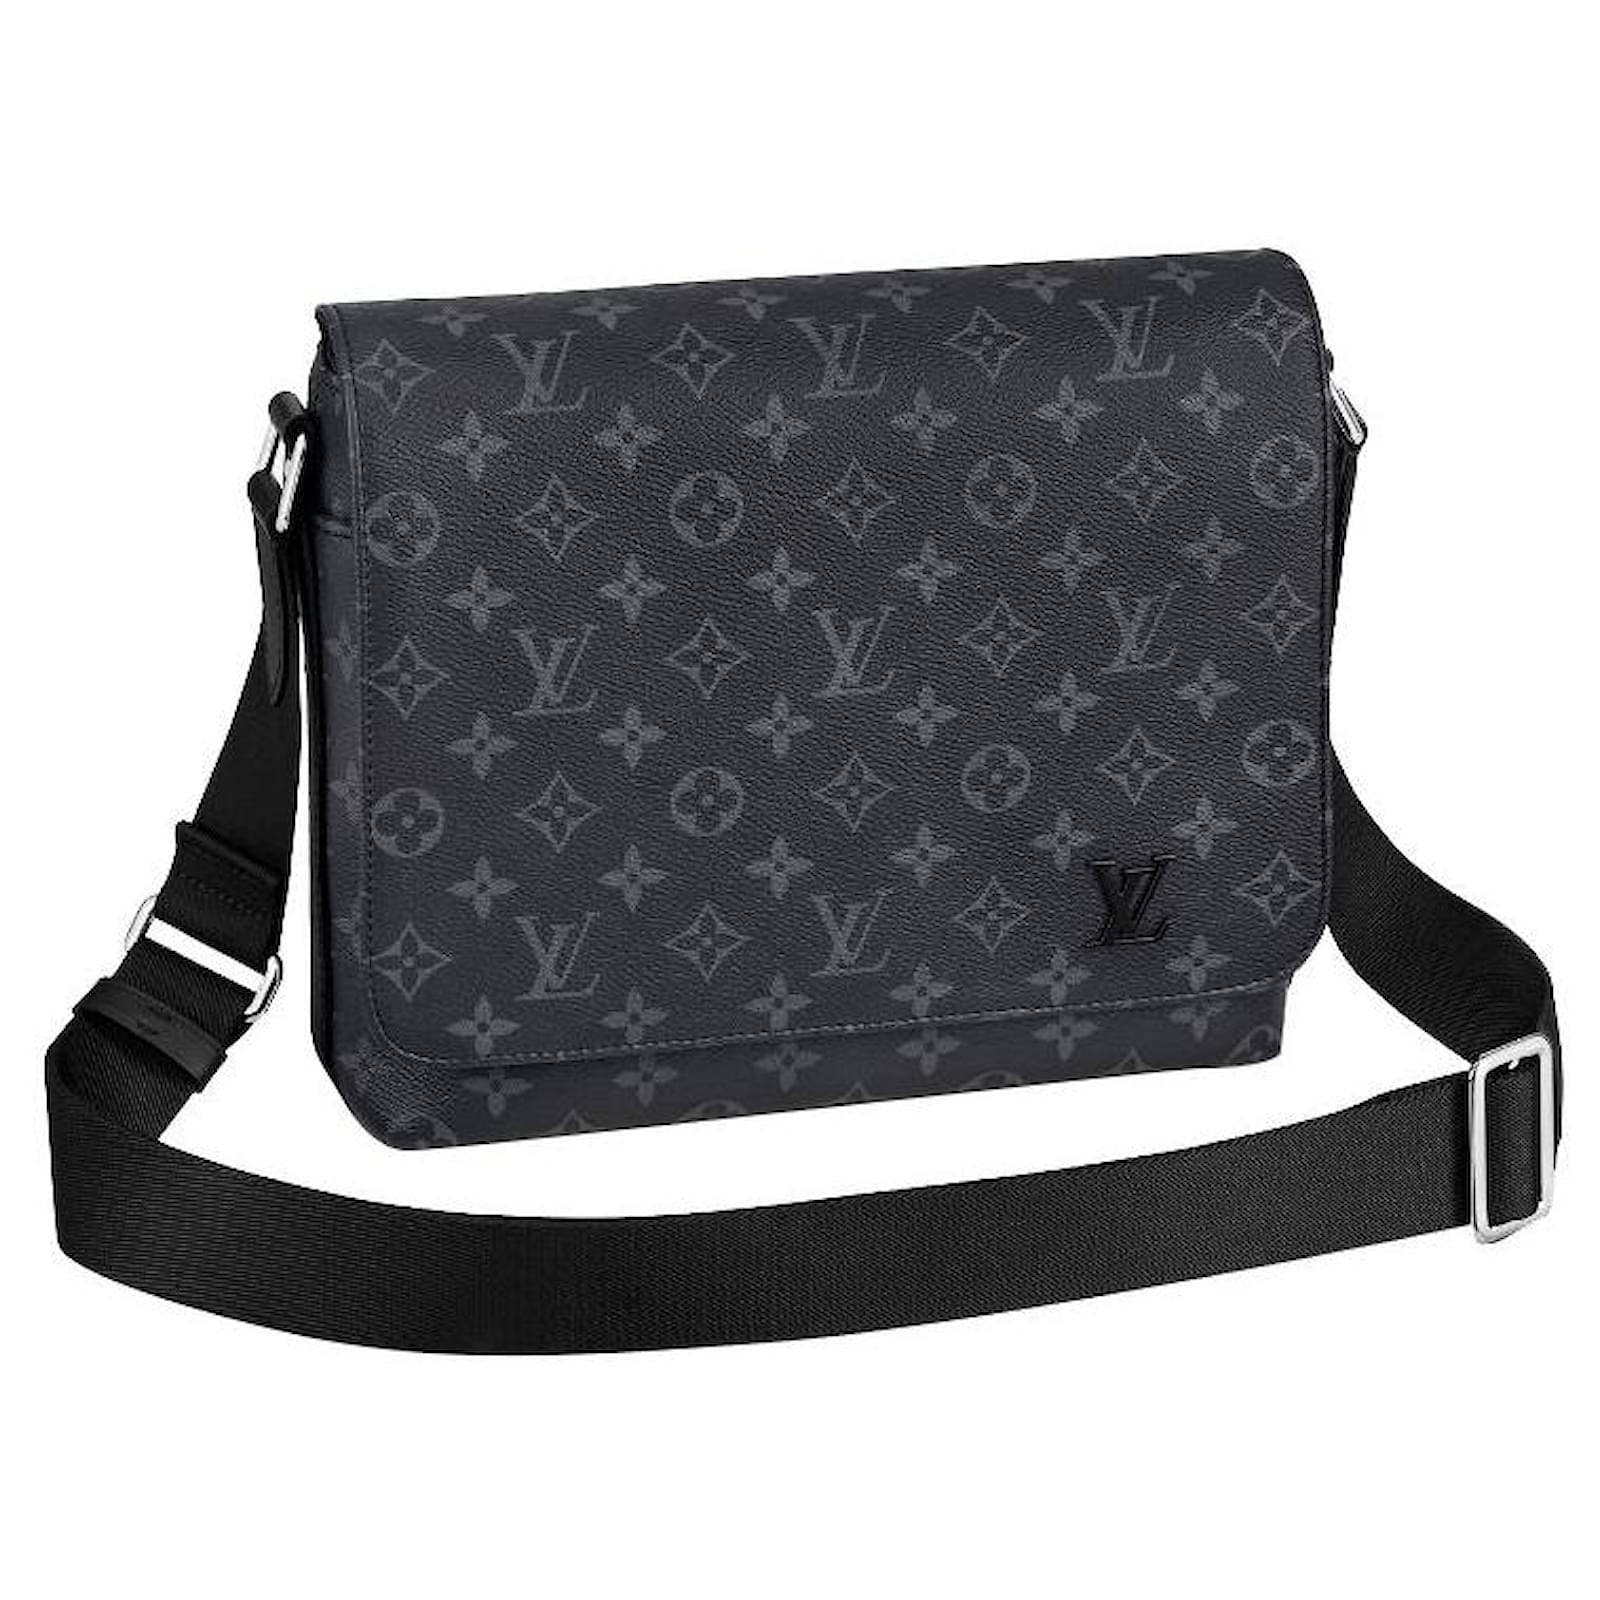 Louis+Vuitton+Backpack+PM+Grey+Leather for sale online